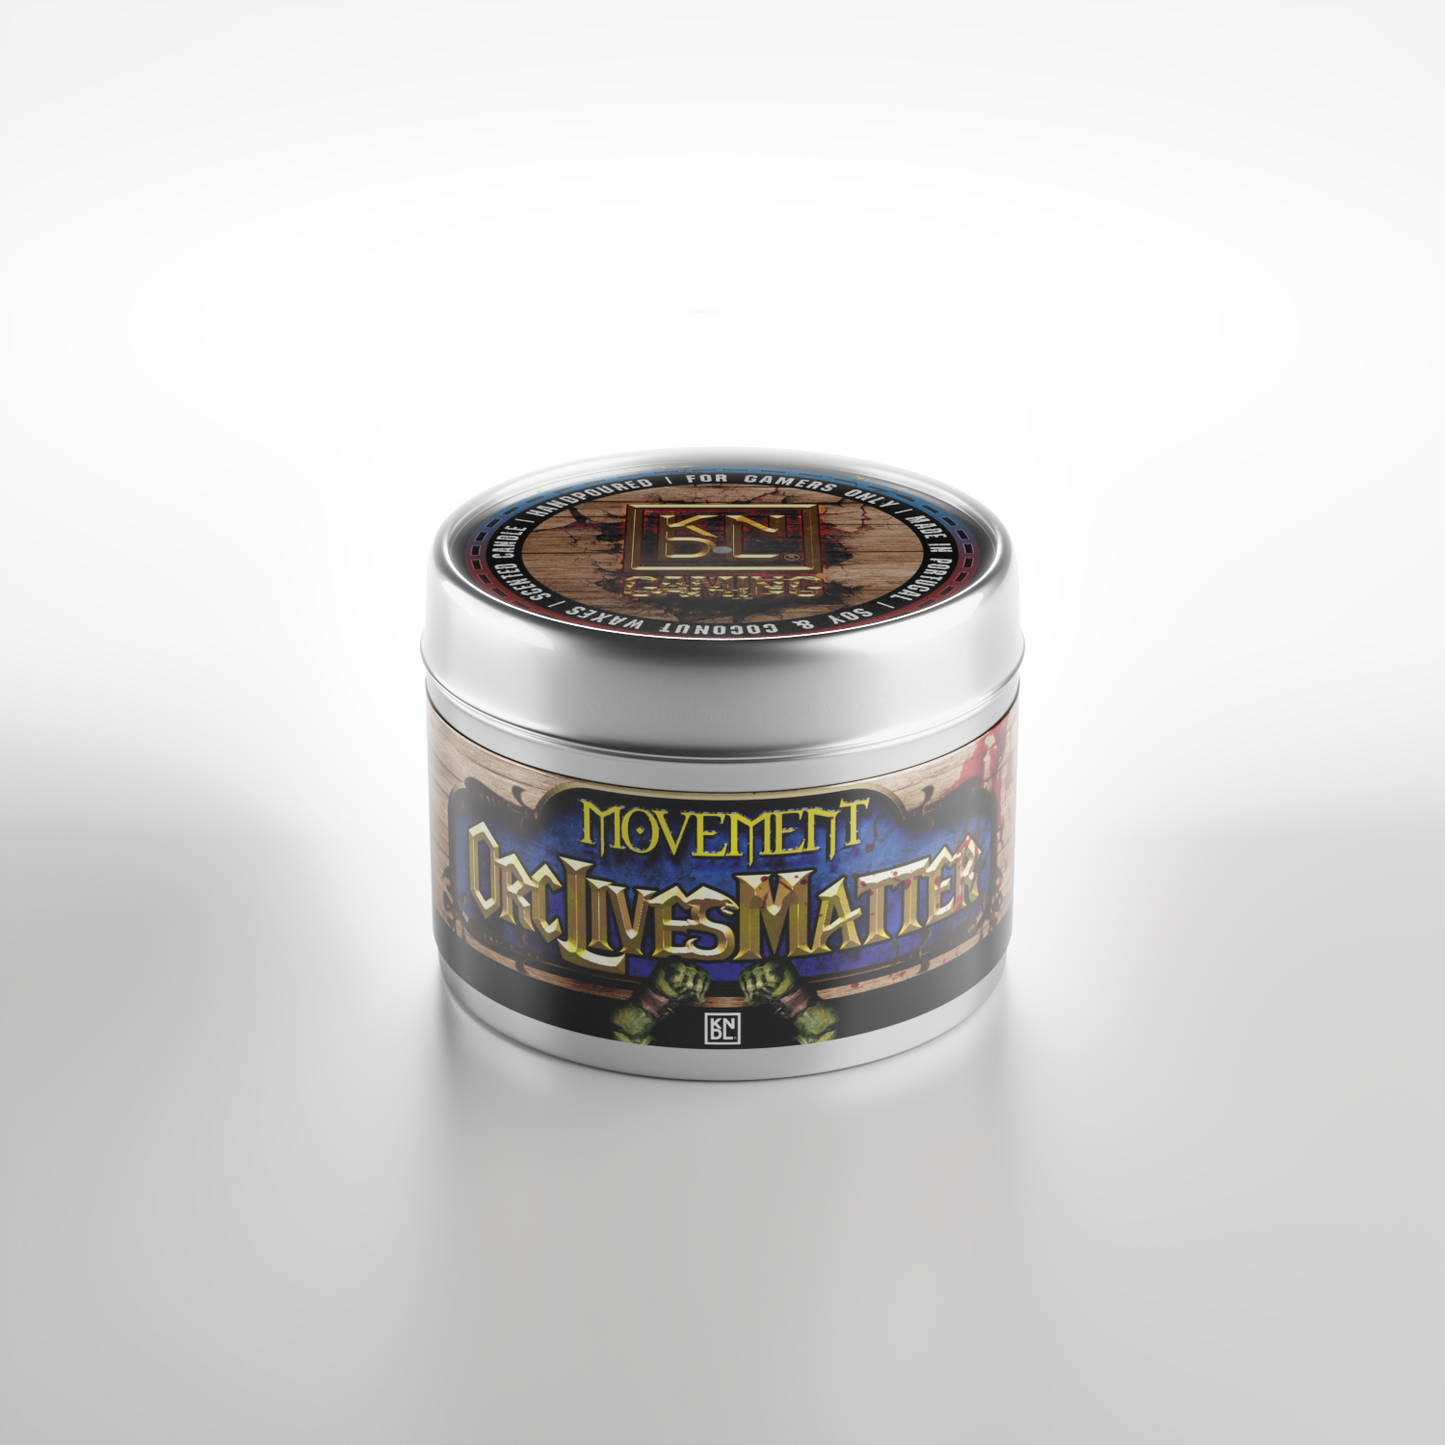 TIN NR 06 | ORC LIVES MATTER | WARCRAFT INSPIRED SCENTED CANDLE